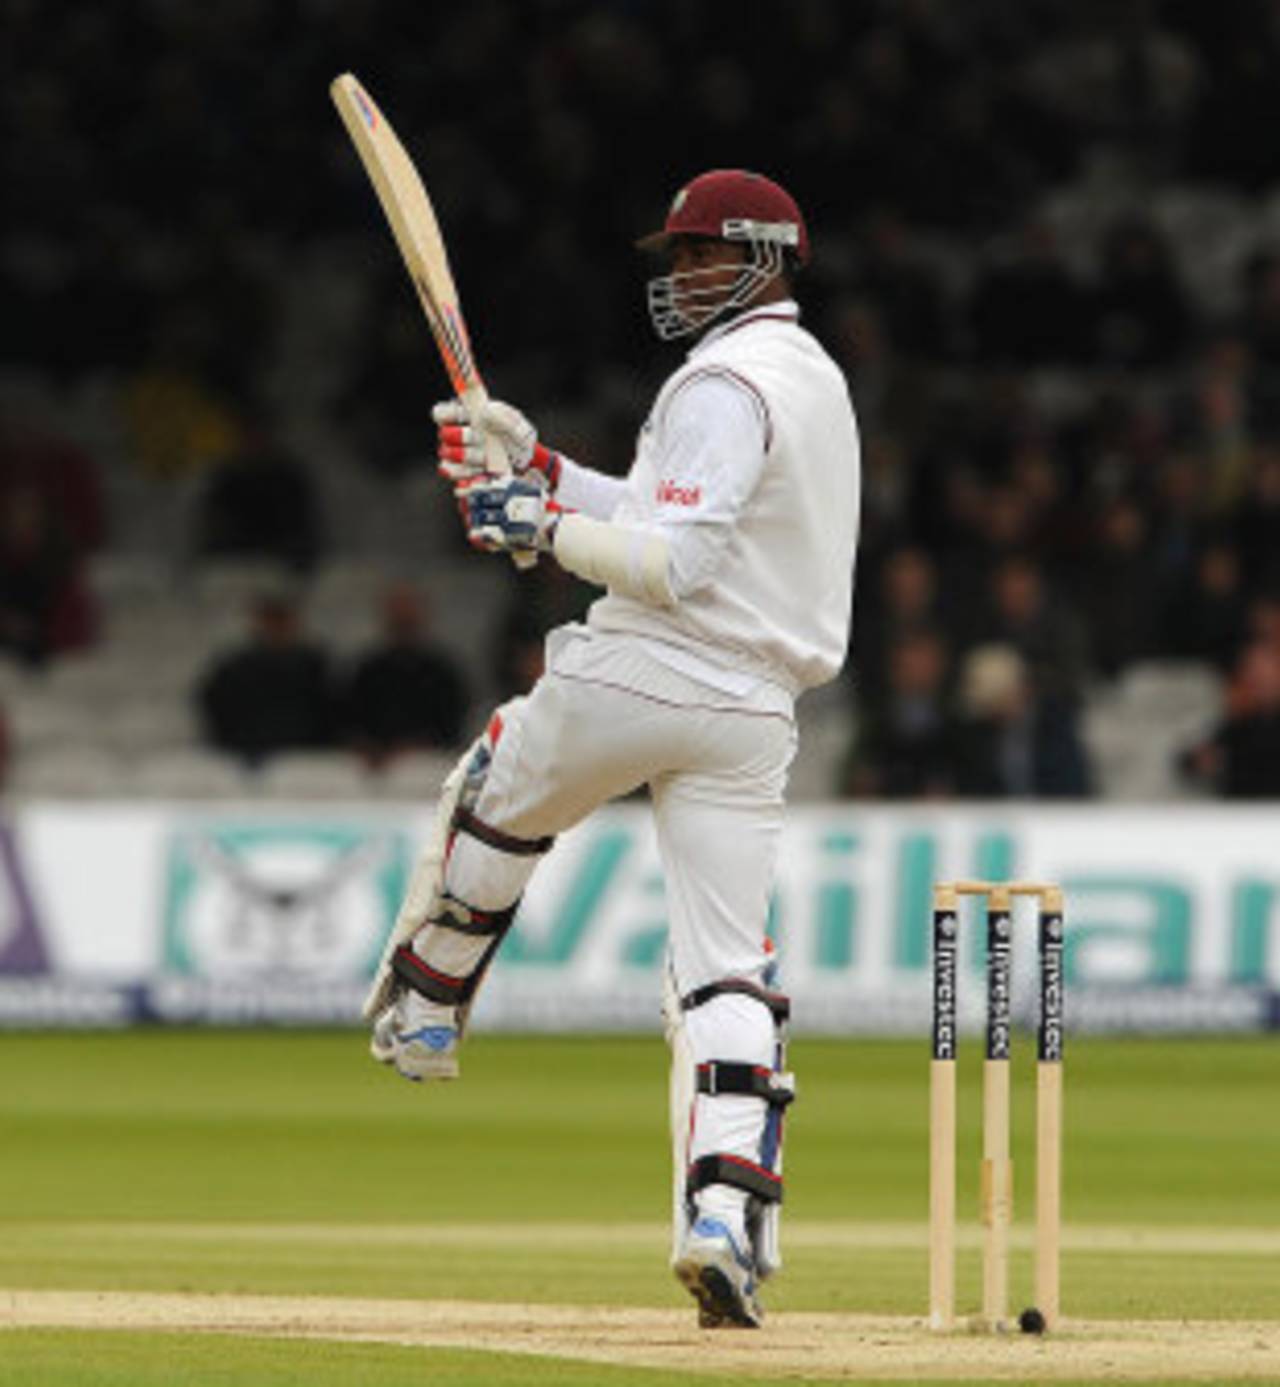 Marlon Samuels played superbly to give West Indies the lead, England v West Indies, 1st Test, Lord's, 4th day, May 20, 2012